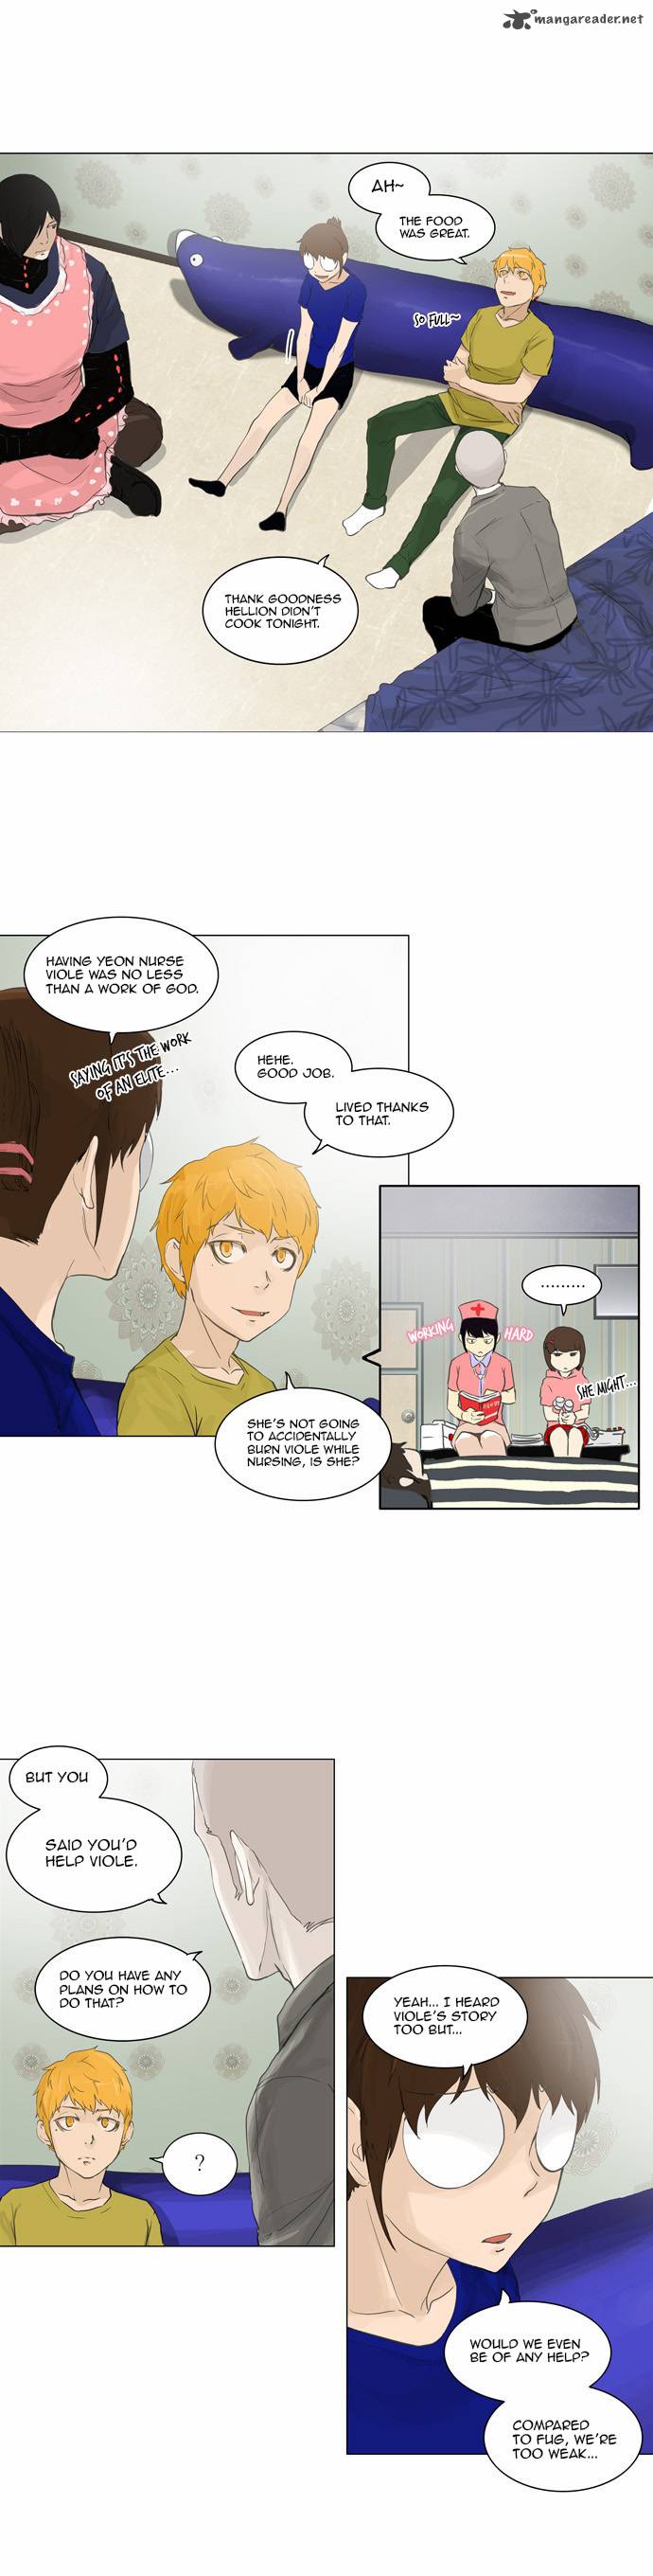 Tower Of God 115 19